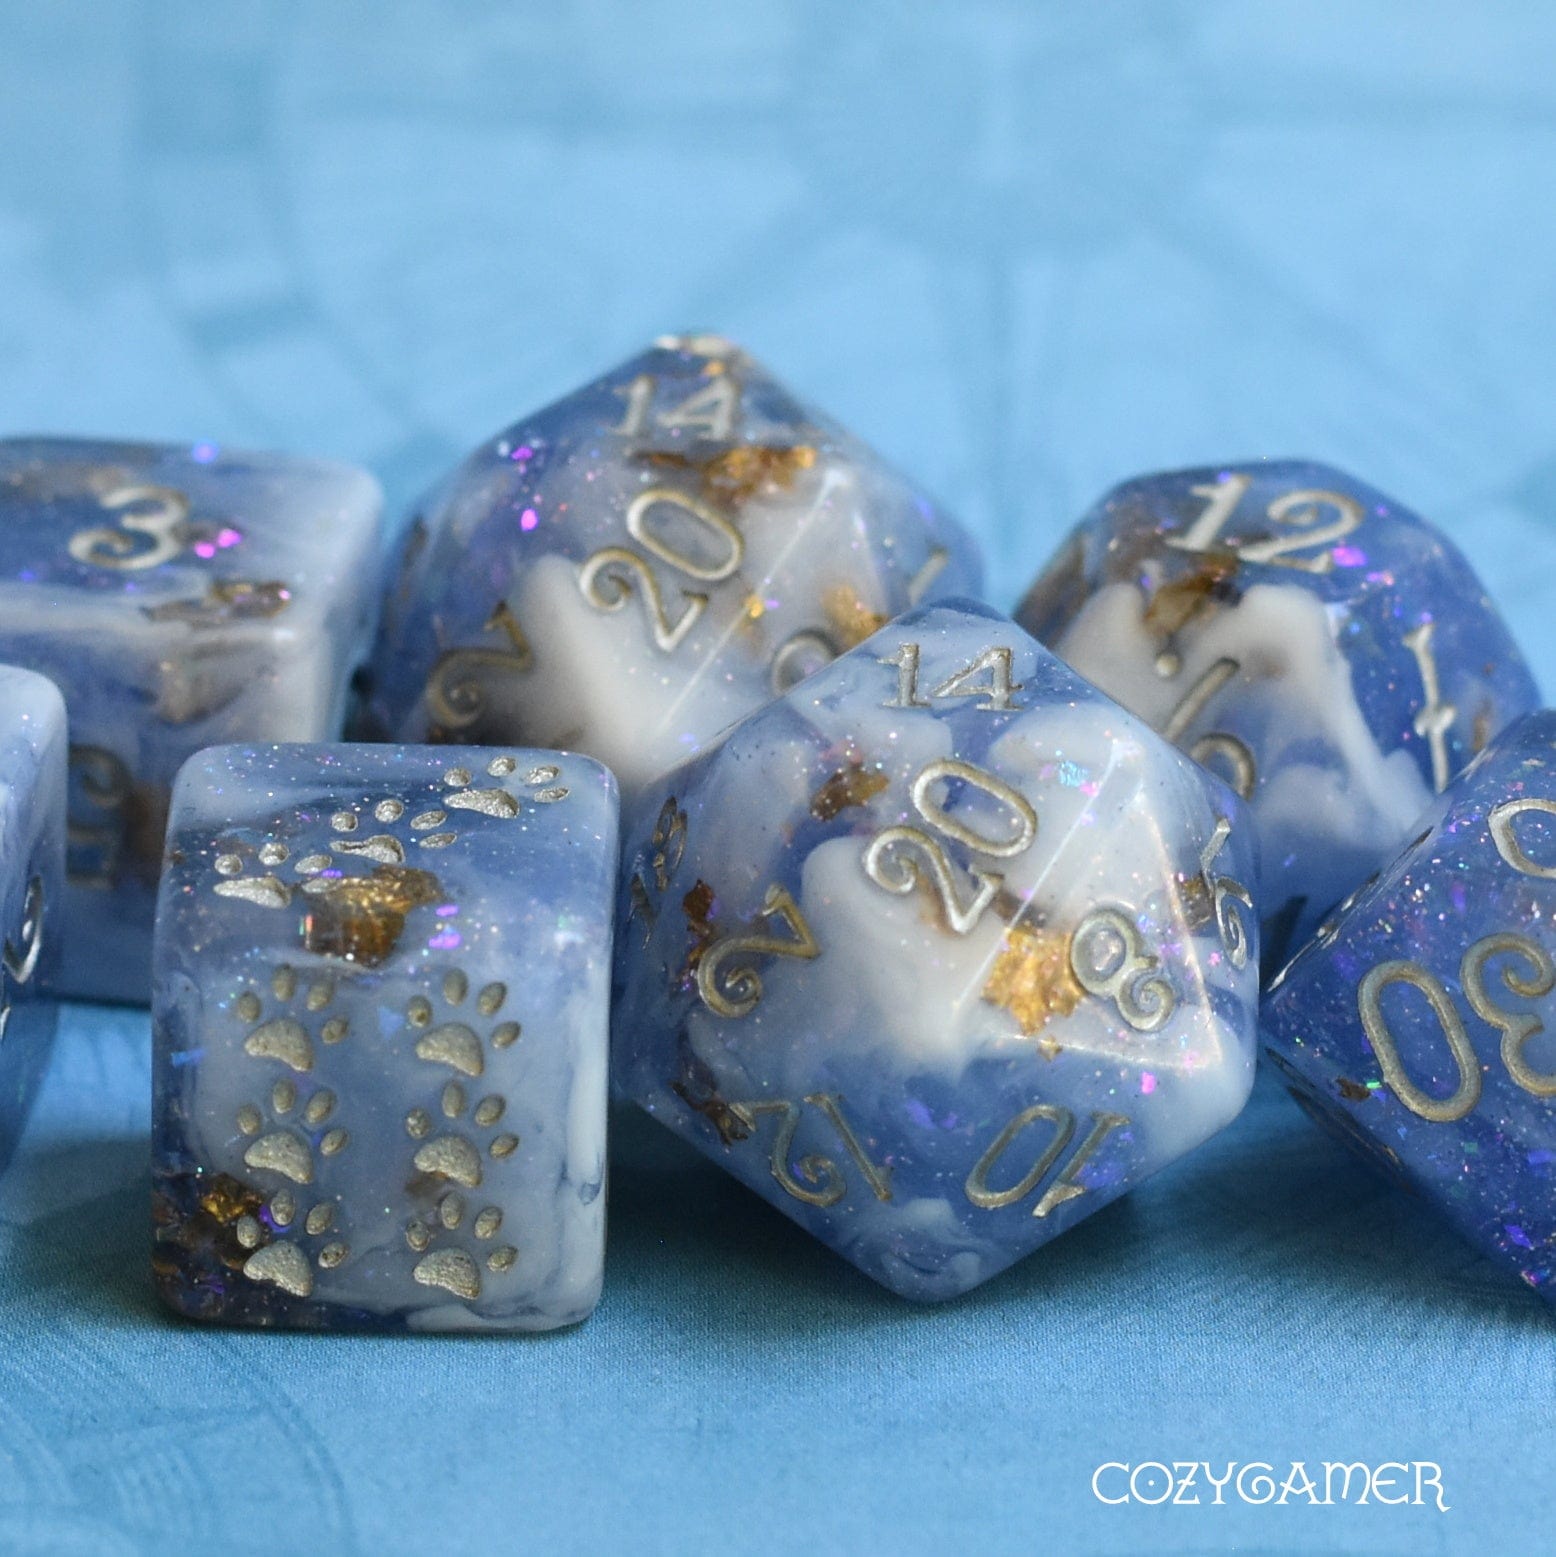 Snow Peak Dice Set. Clear Periwinkle and White Marble, with Glitter and Foil